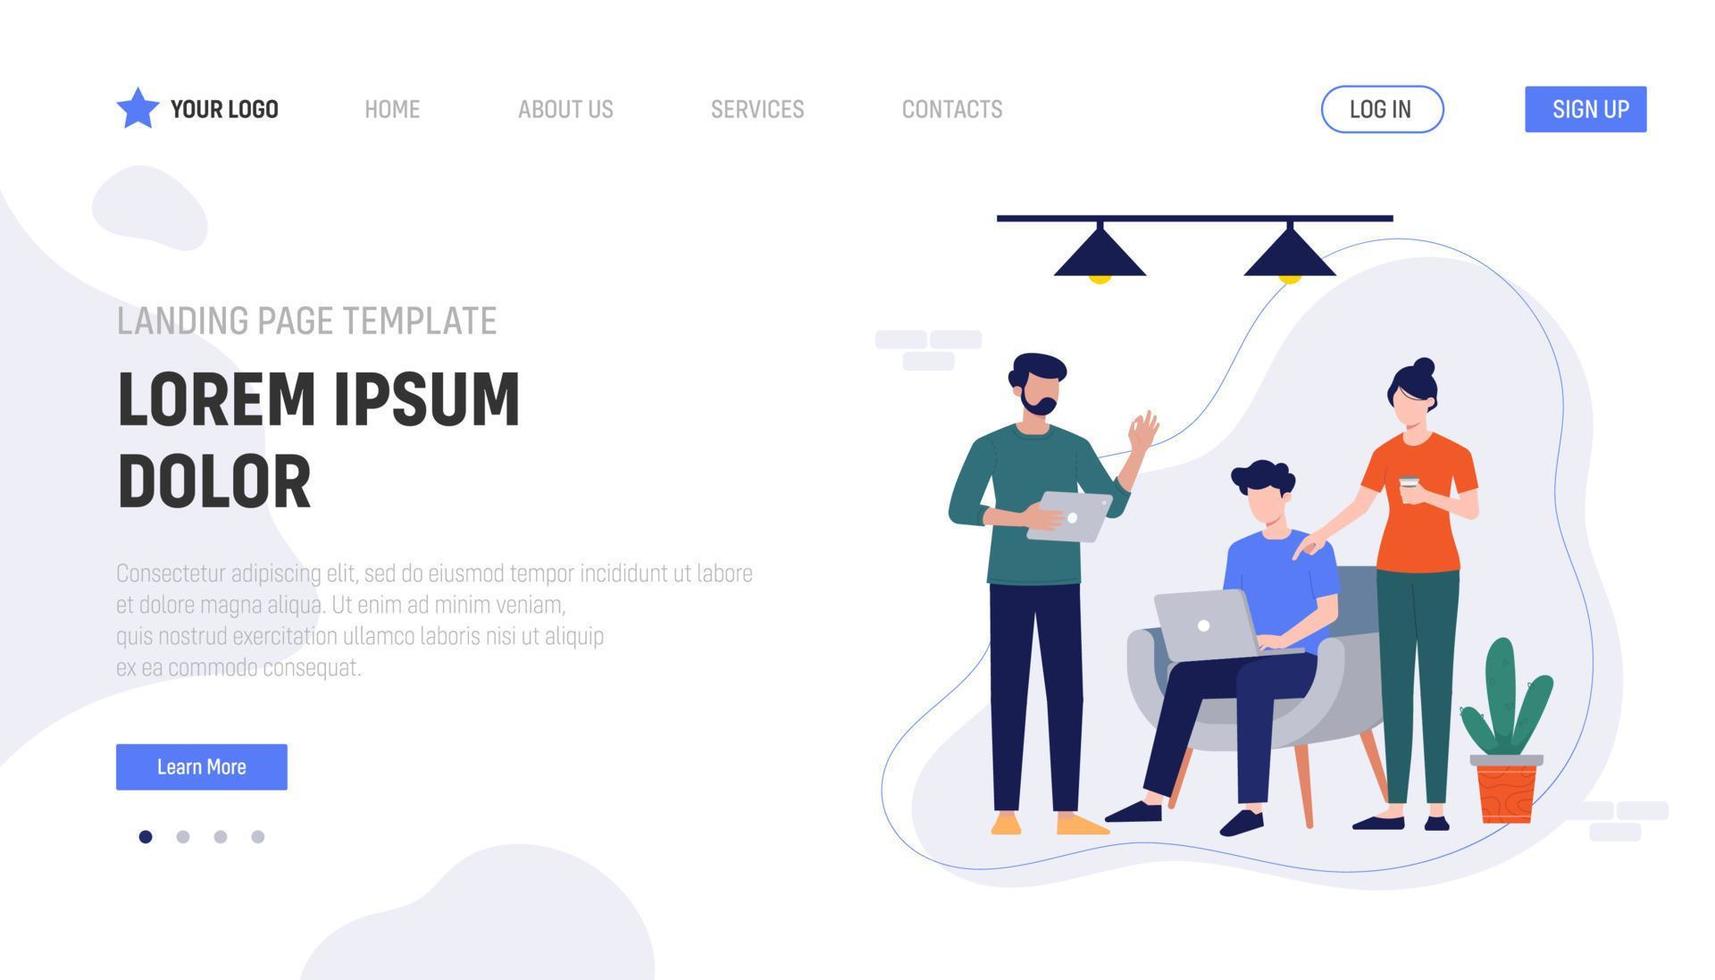 Web page design templates for data analysis,, consulting, social media marketing. Modern vector illustration concepts for website and mobile website development.. Modern vector flat illustration.